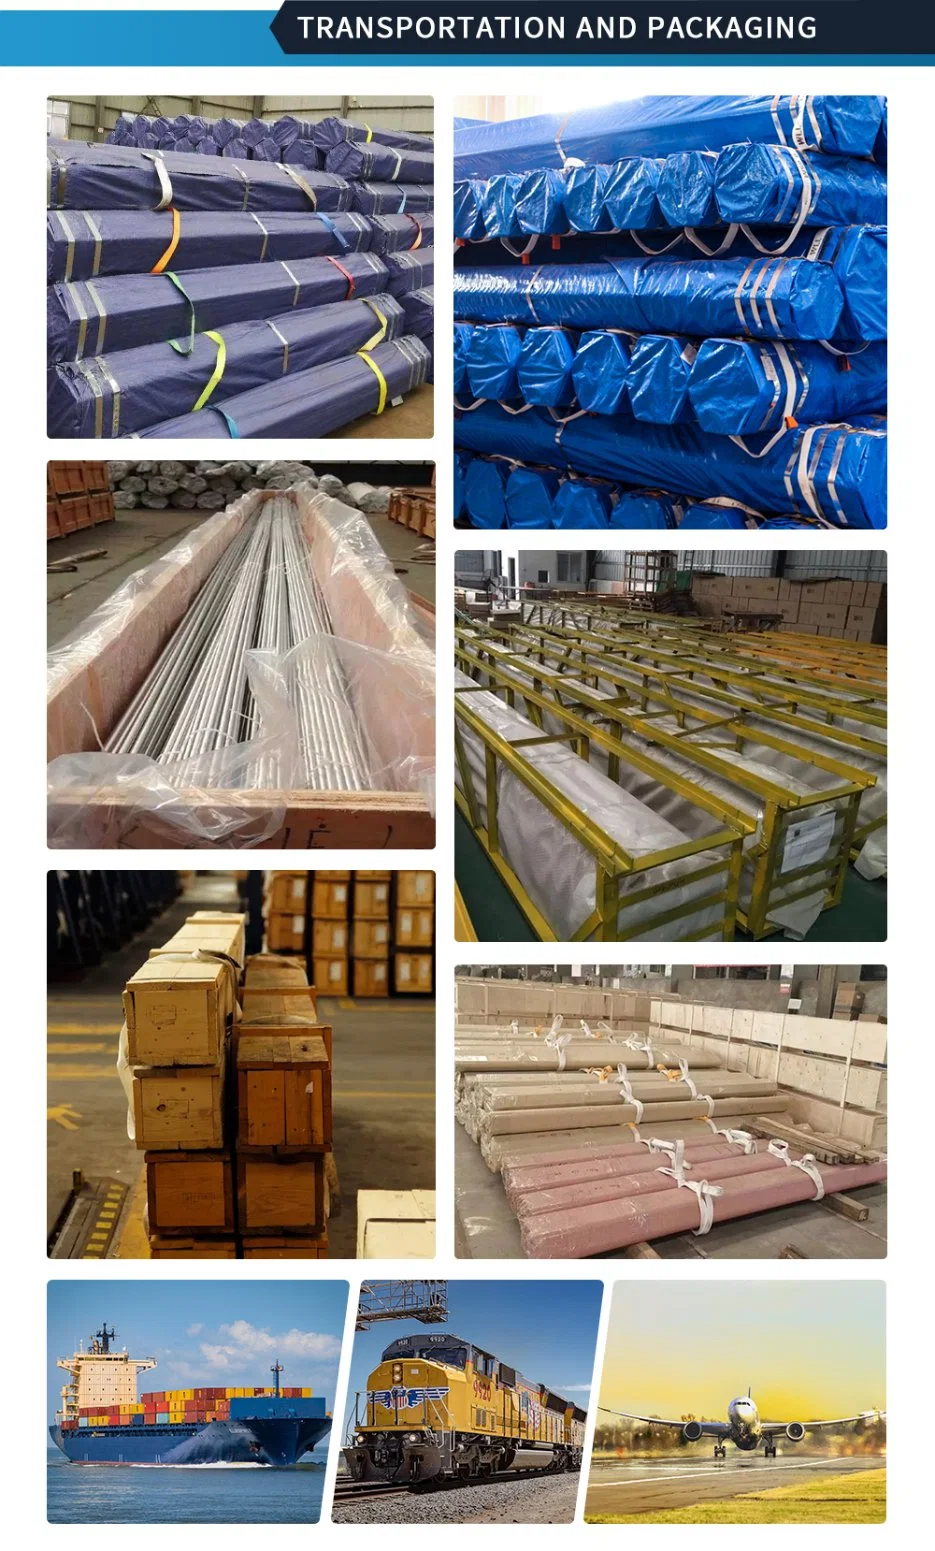 304 304L 316 316L Sanitary Welded Seamless Tube Stainless Steel Pipe